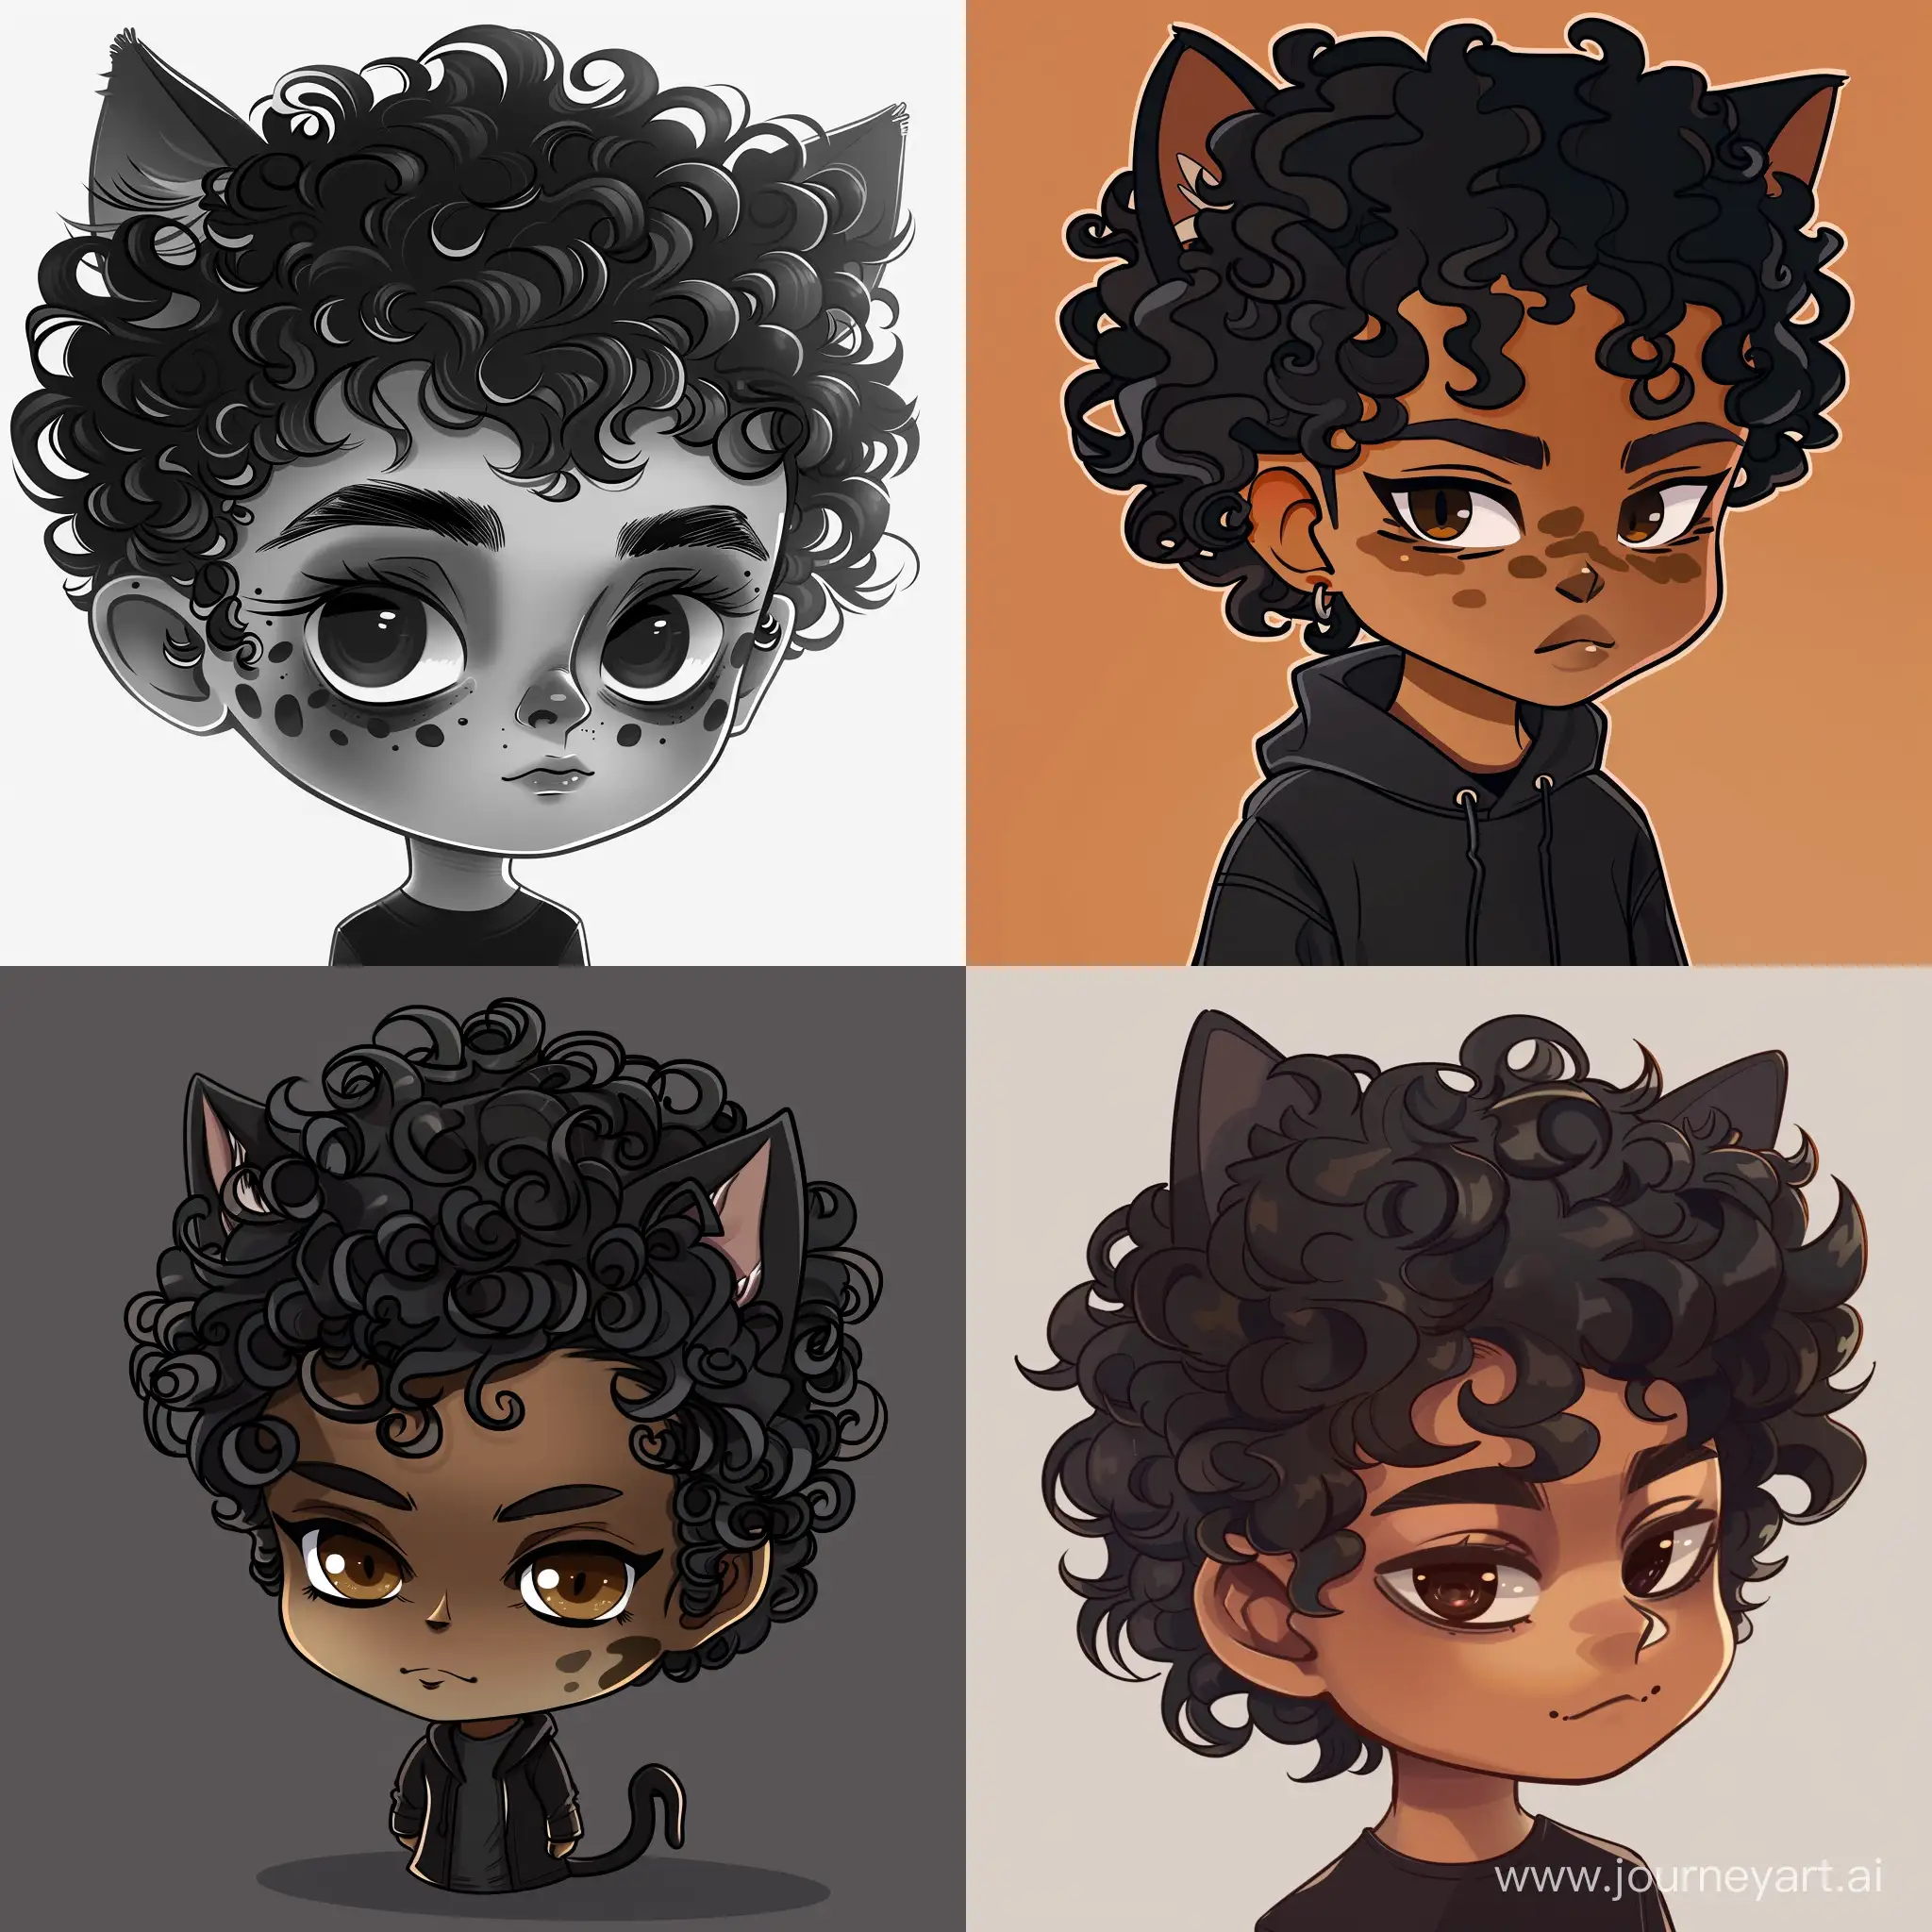 CurlyHaired-Cola-Person-with-Unique-Design-and-Cat-Ears